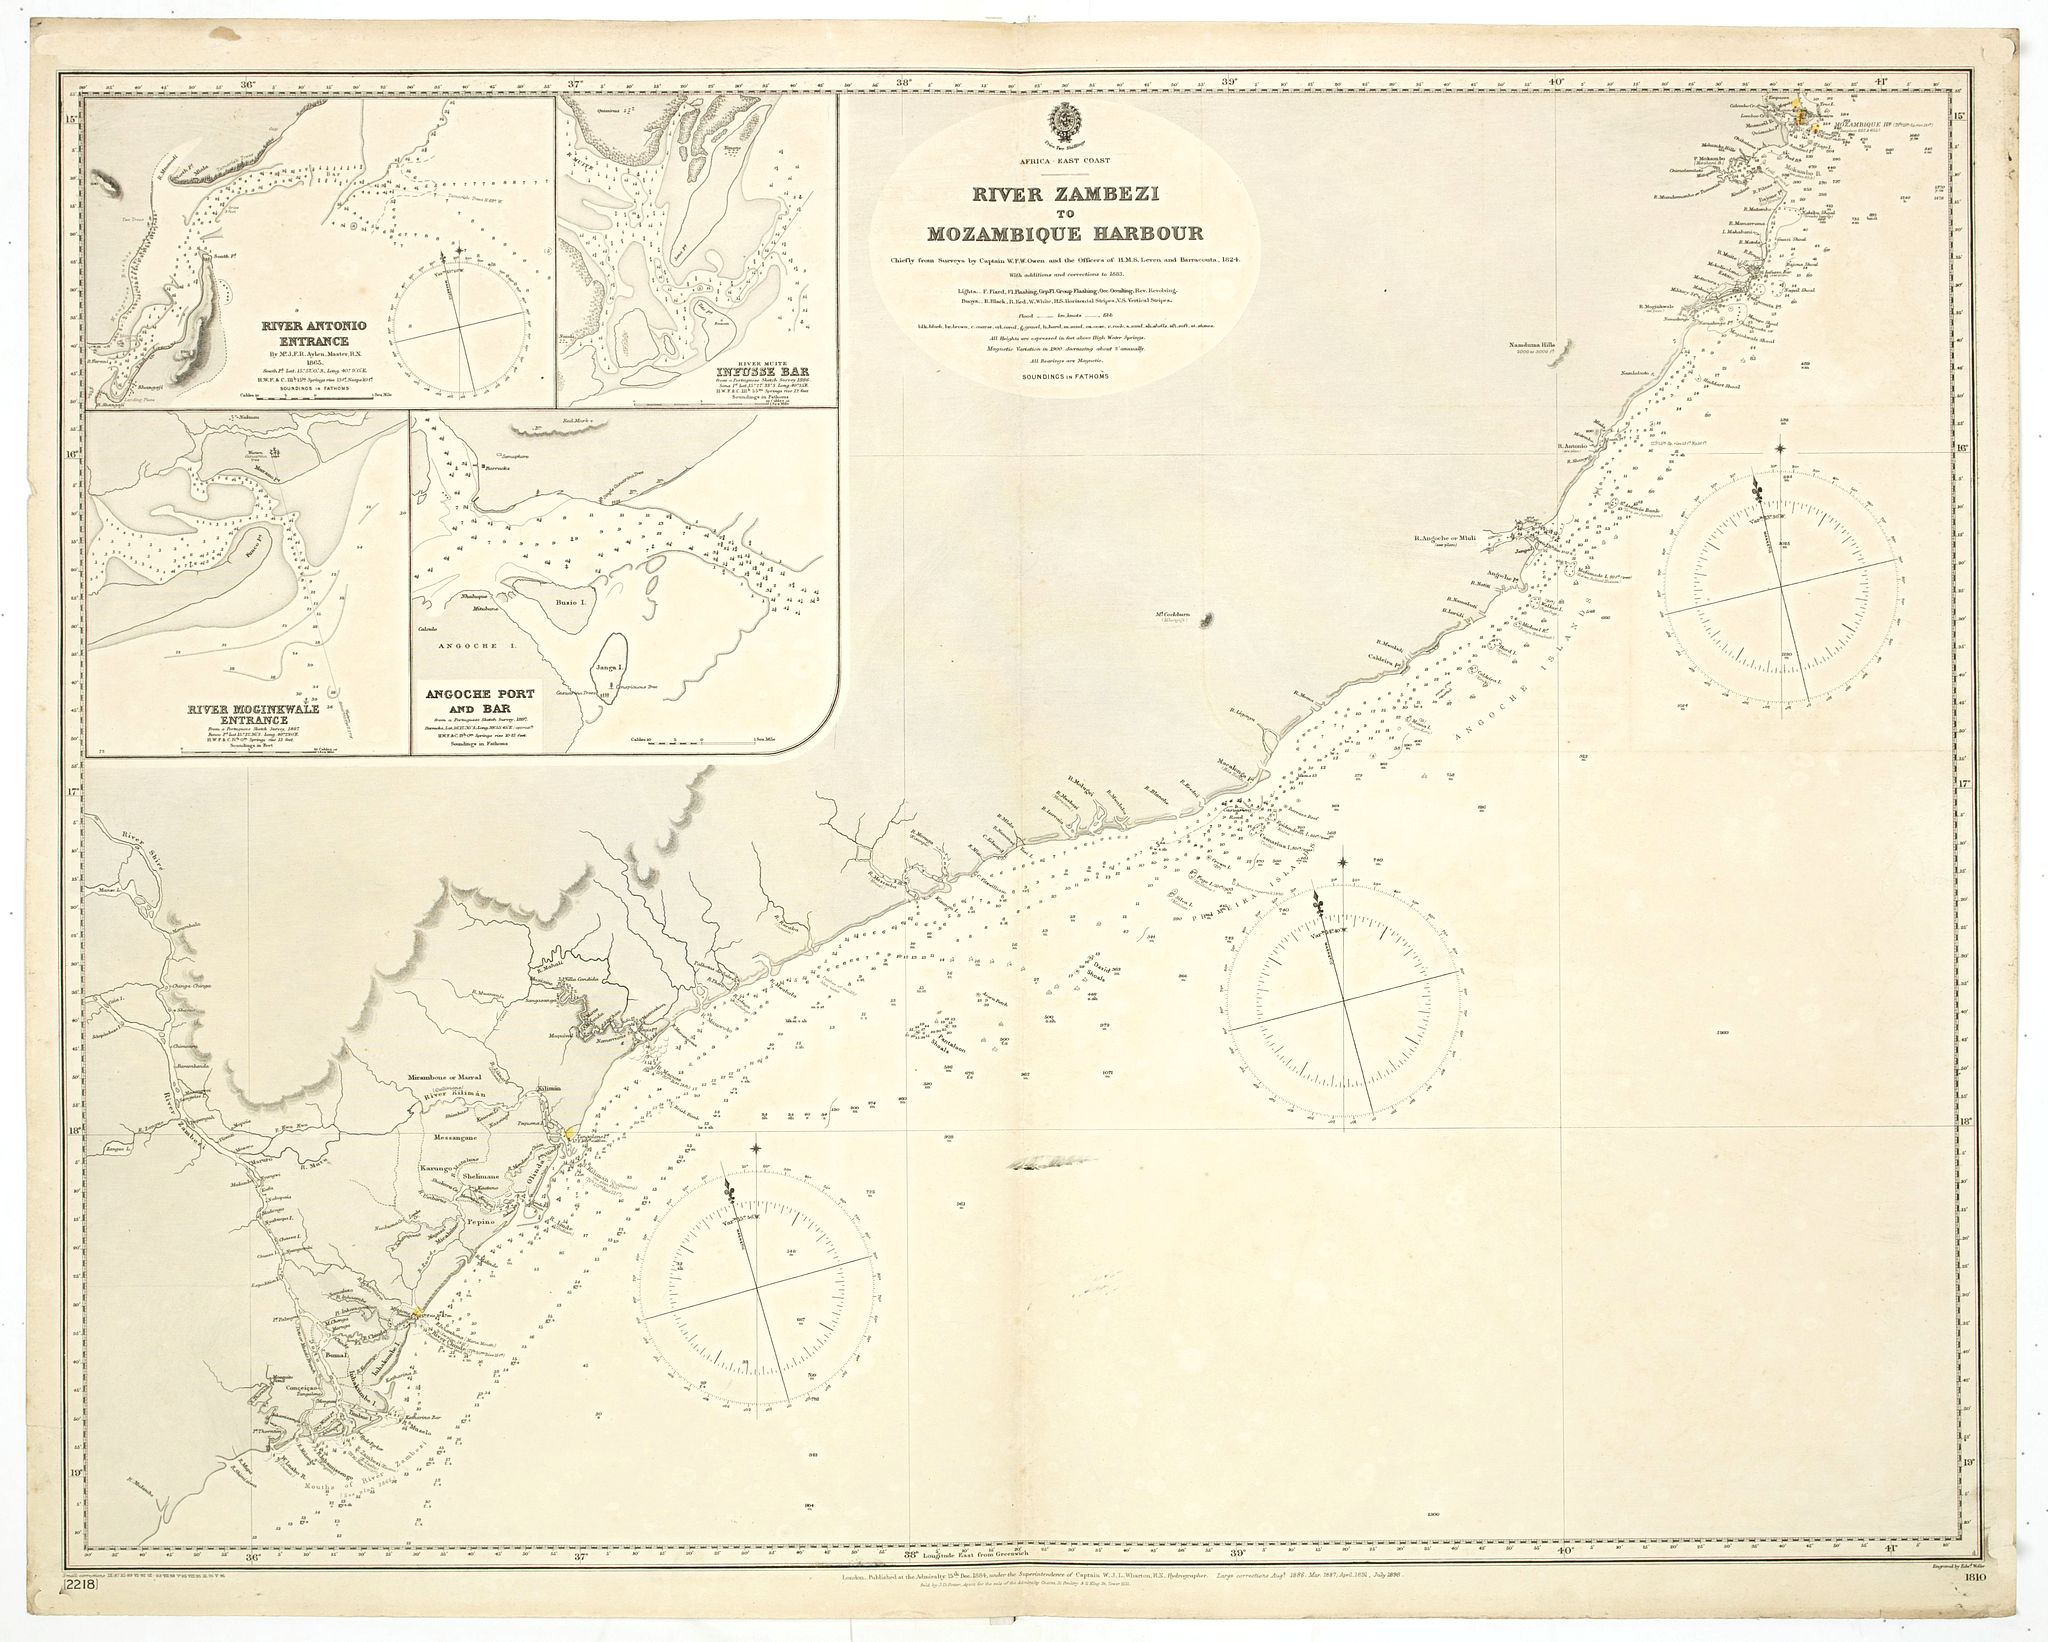 	Africa east coast River Zambezi to Mozambique Harbour surveys by Captain W. F. W. Owen HMS Leven and Barracouta 1824 With additions and corrections to 1883